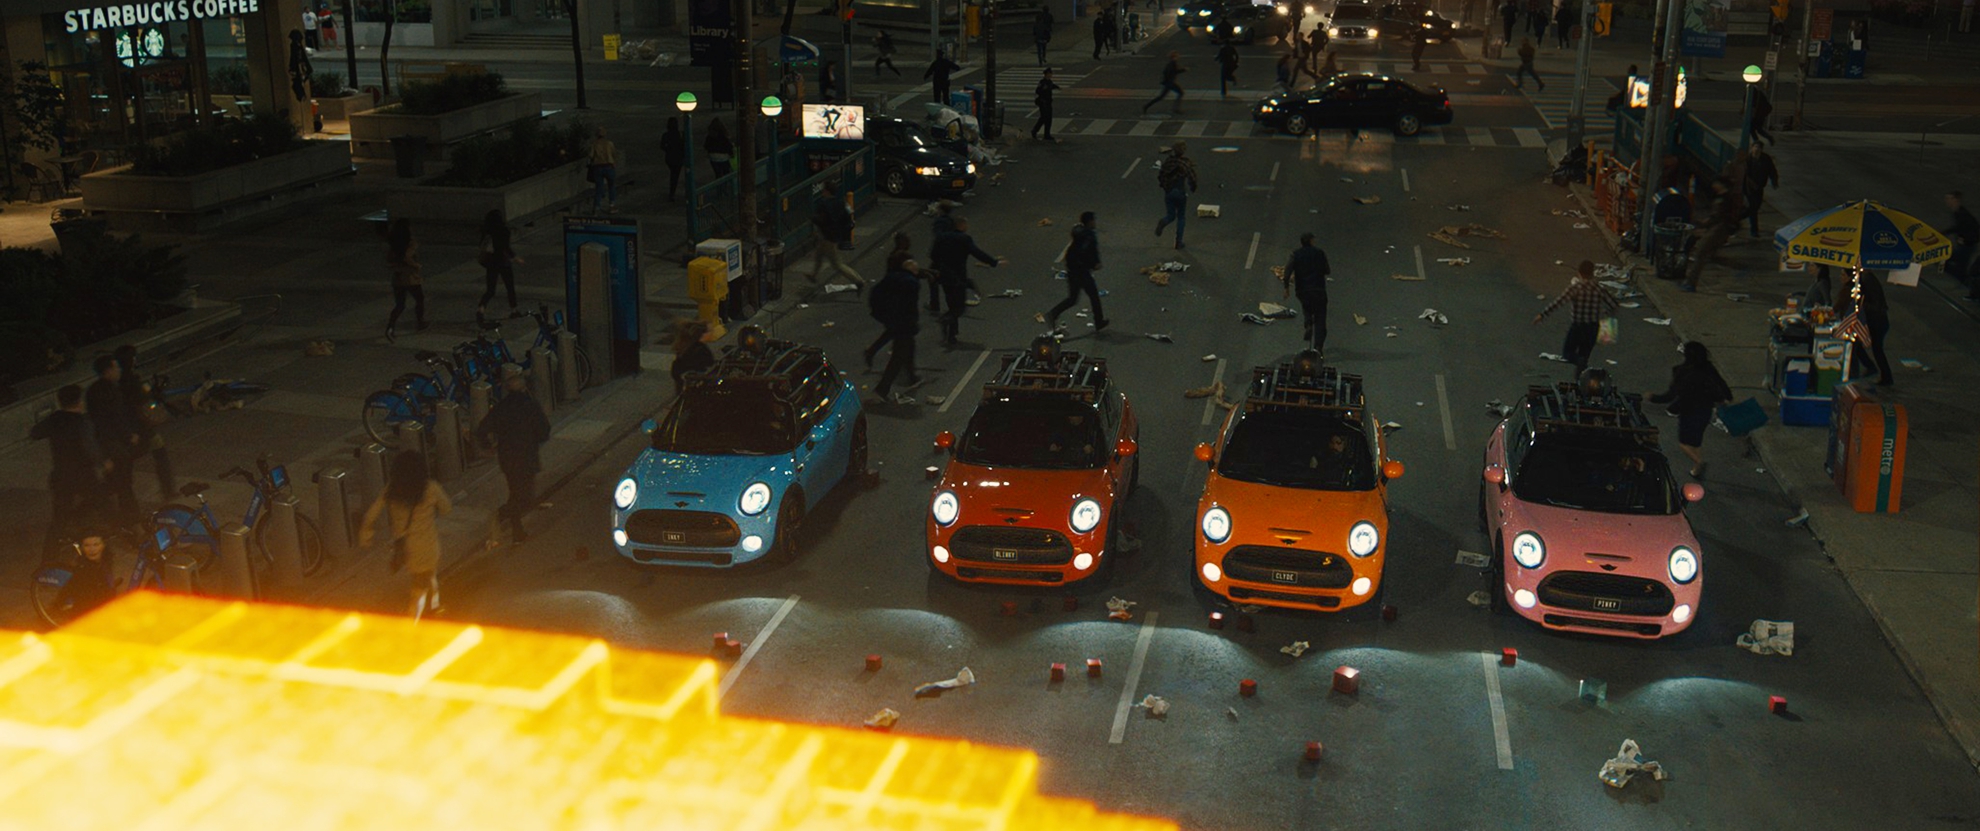 Sci-fi comedy PIXELS by Sony Pictures